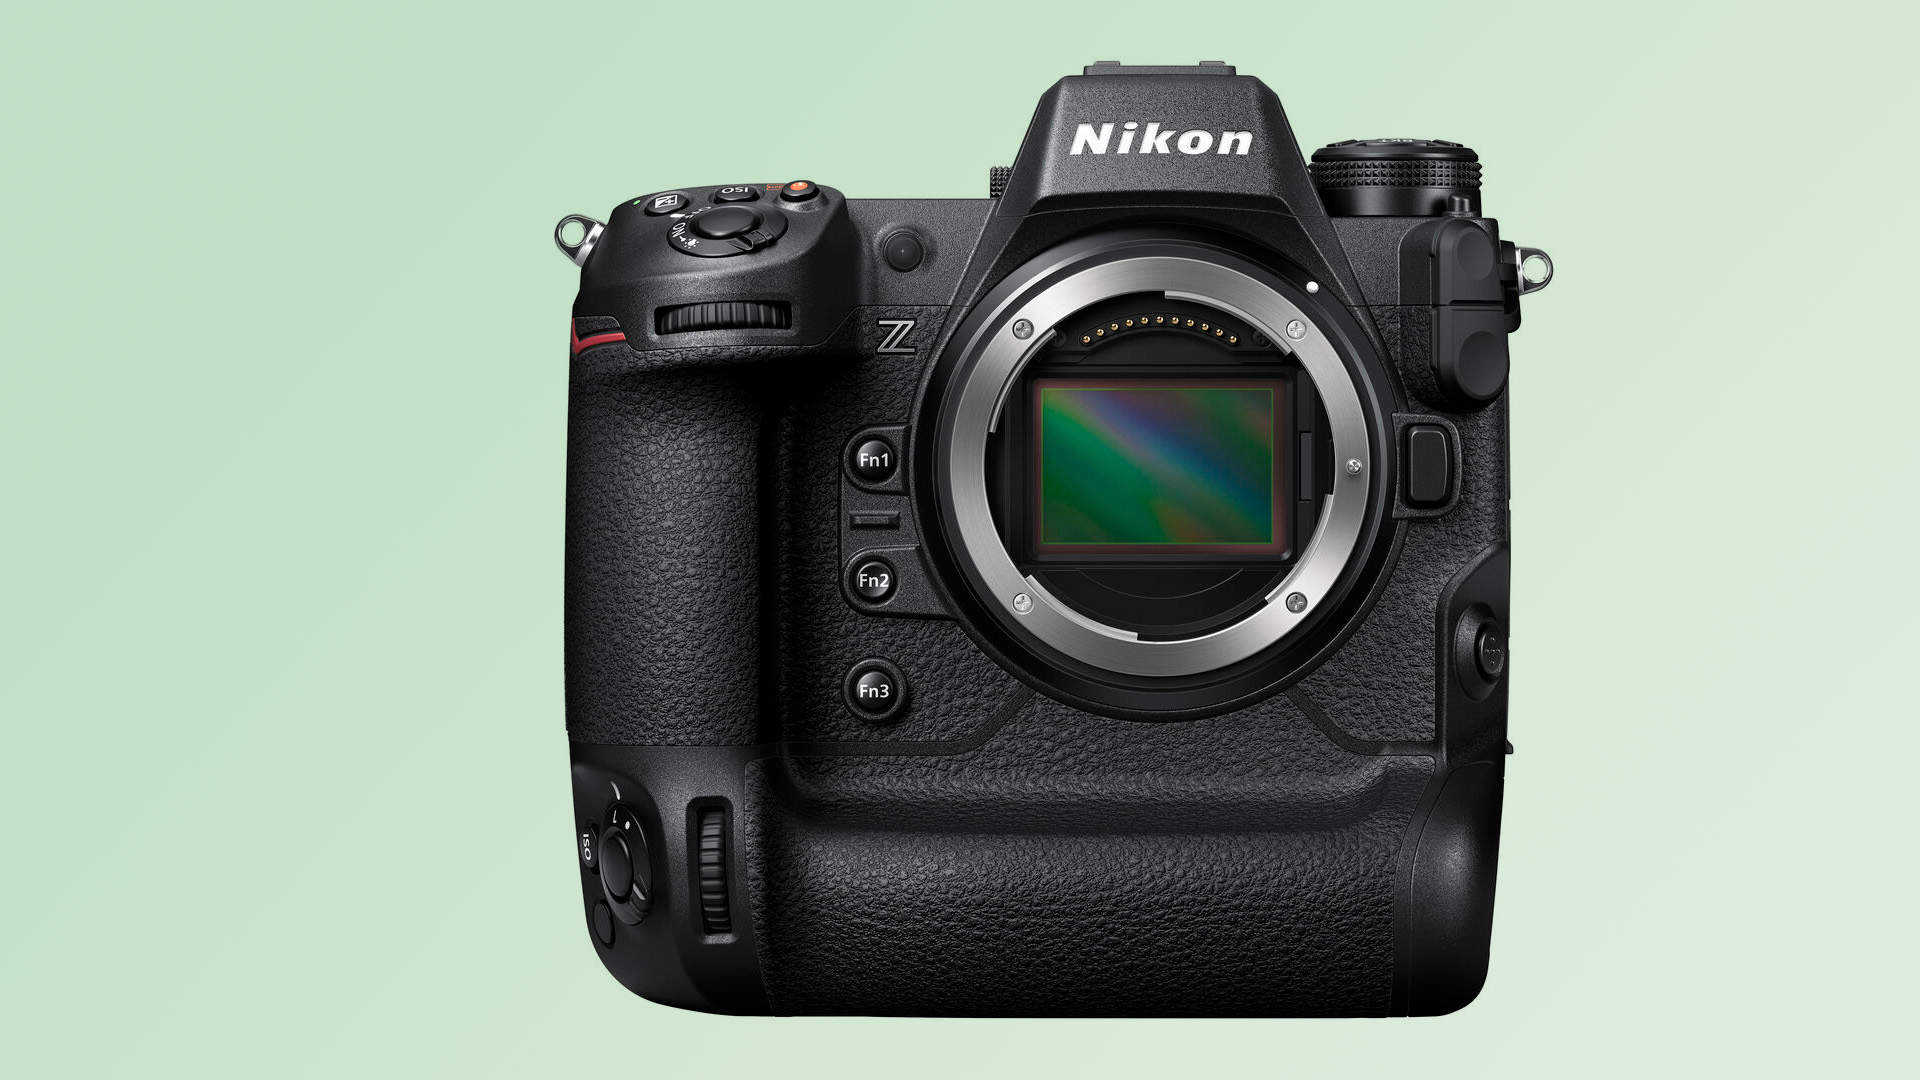 Product shot of the Nikon Z9 camera straight on from the front with full-frame sensor exposed